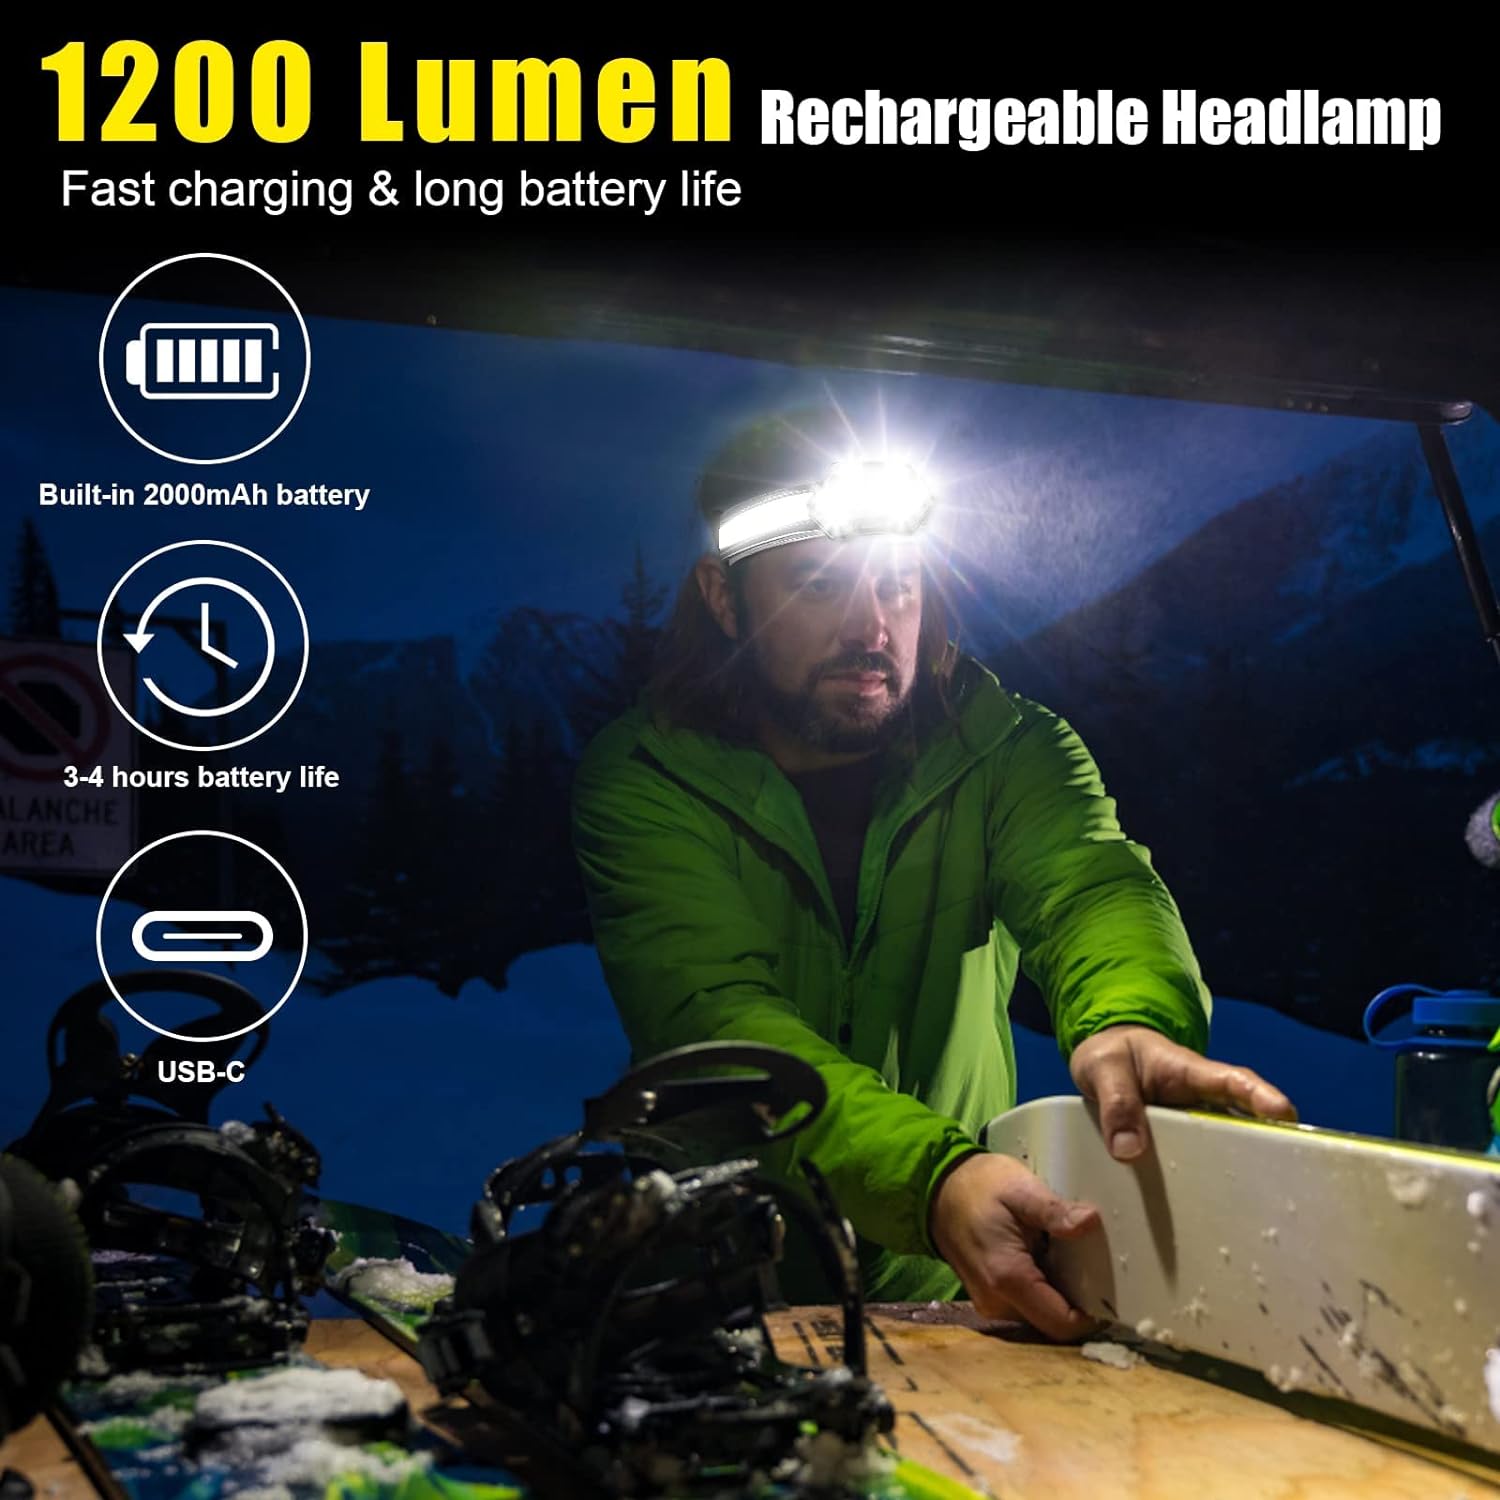 LED Headlamp Rechargeable, 1200 Lumen Super Bright Headlamp Flashlight, 270Ã‚° Wide Beam LED Headlamps with Red Taillight, 8 Mode Lightweight Waterproof Head Lamp for Outdoor Camping Fishing Running